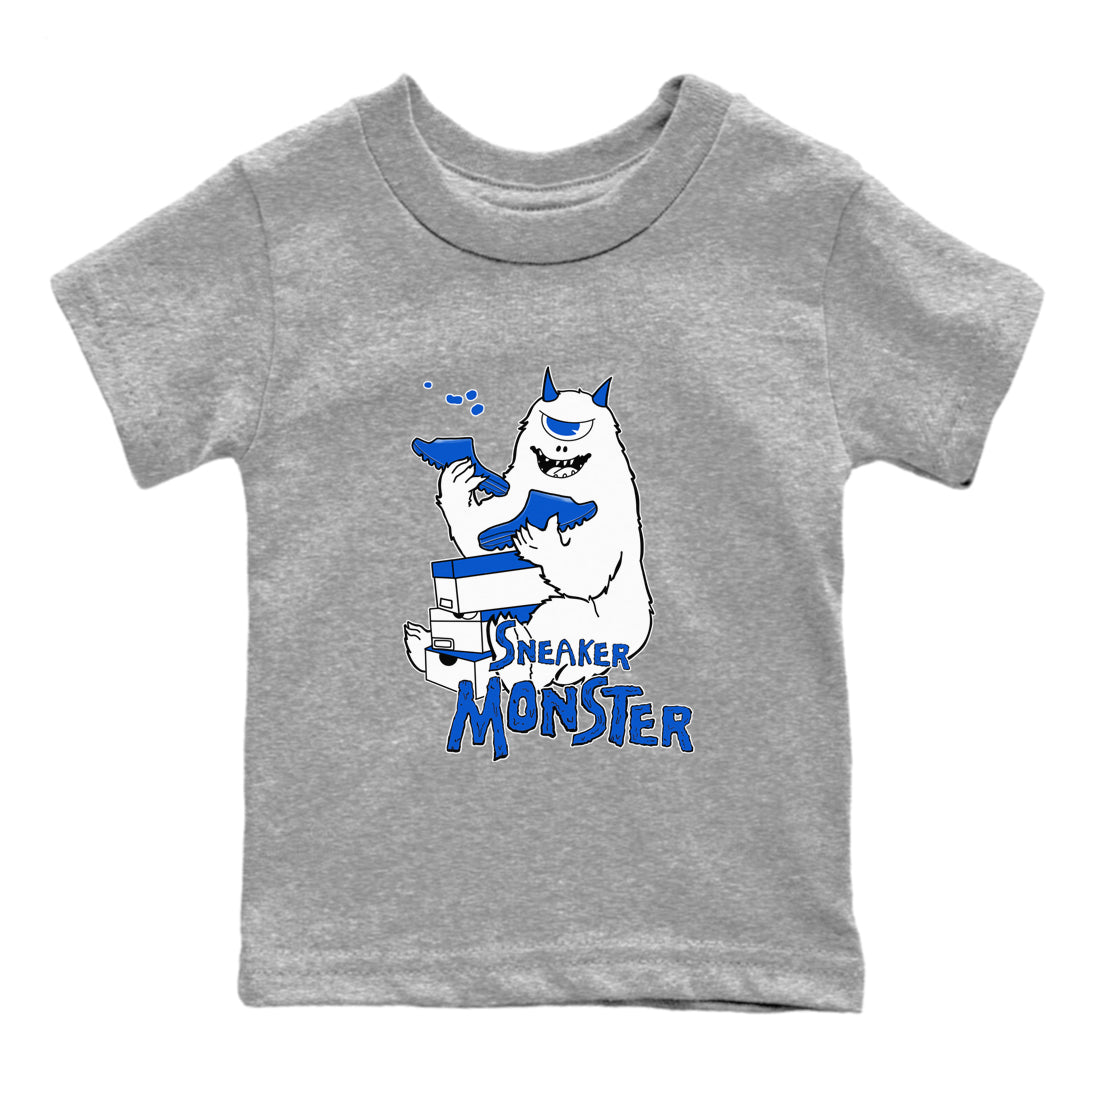 Yeezy Slide Azure shirts to match jordans Sneaker Monster sneaker match tees Yeezy Slide Azure SNRT Sneaker Tees streetwear brand Baby and Youth Heather Grey 2 cotton tee